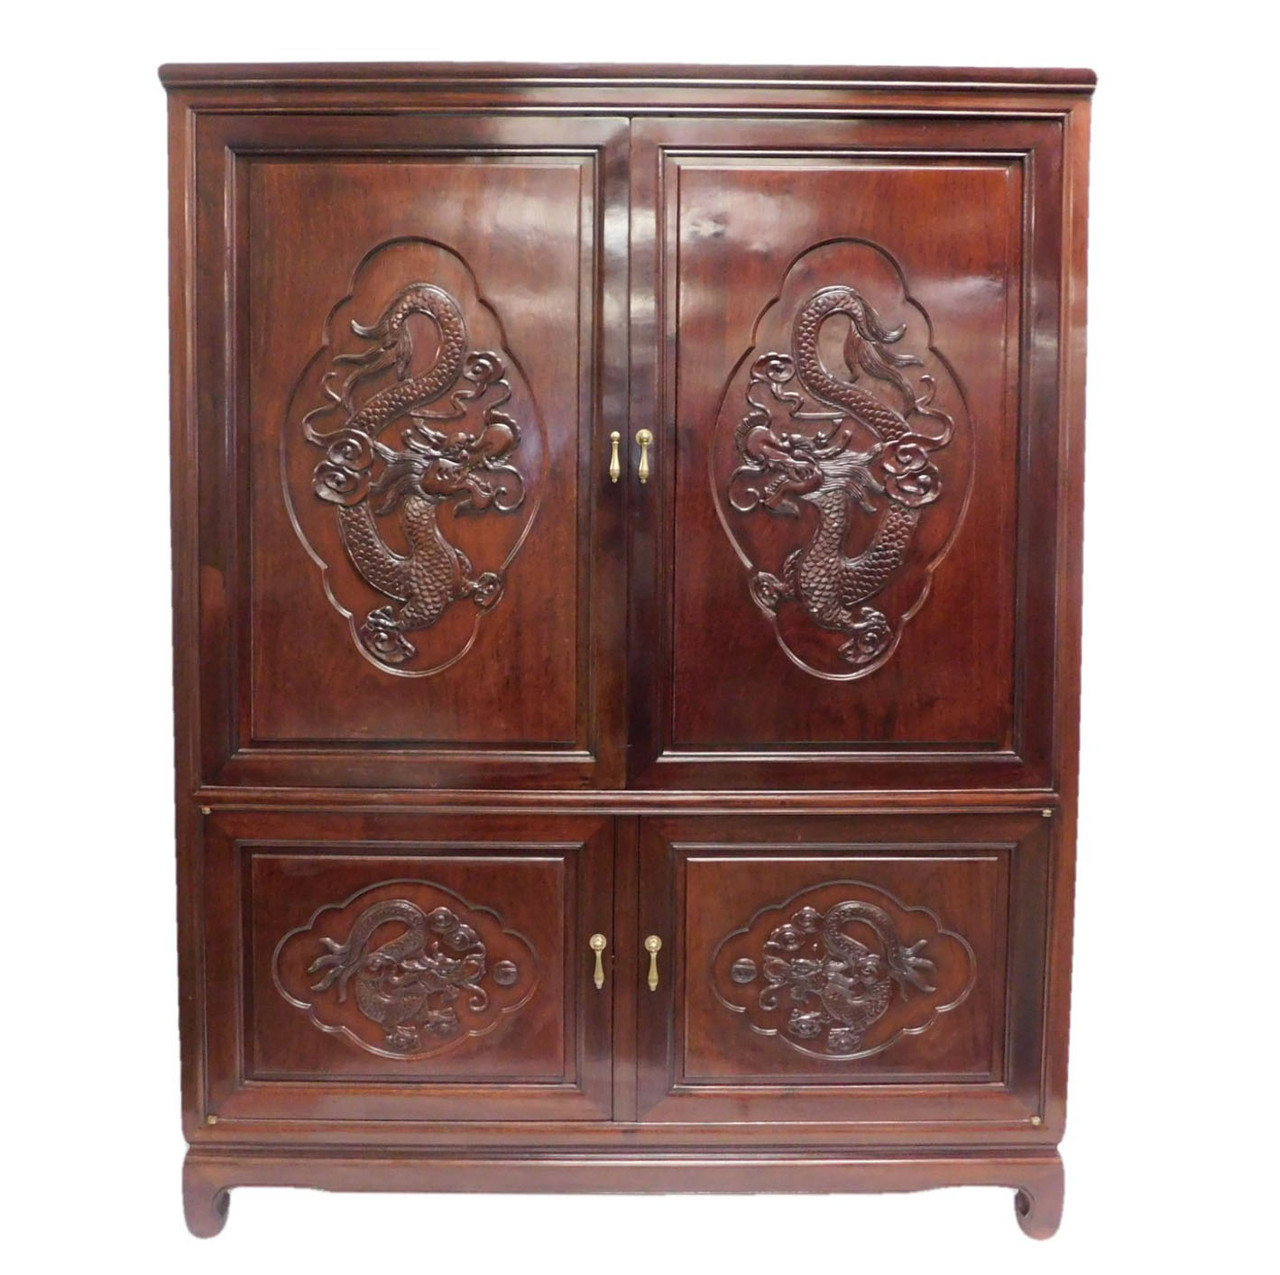 Wooden Plate Stand in Rosewood Stain - Oriental Furniture Warehouse:  Chinese & Asian Styles